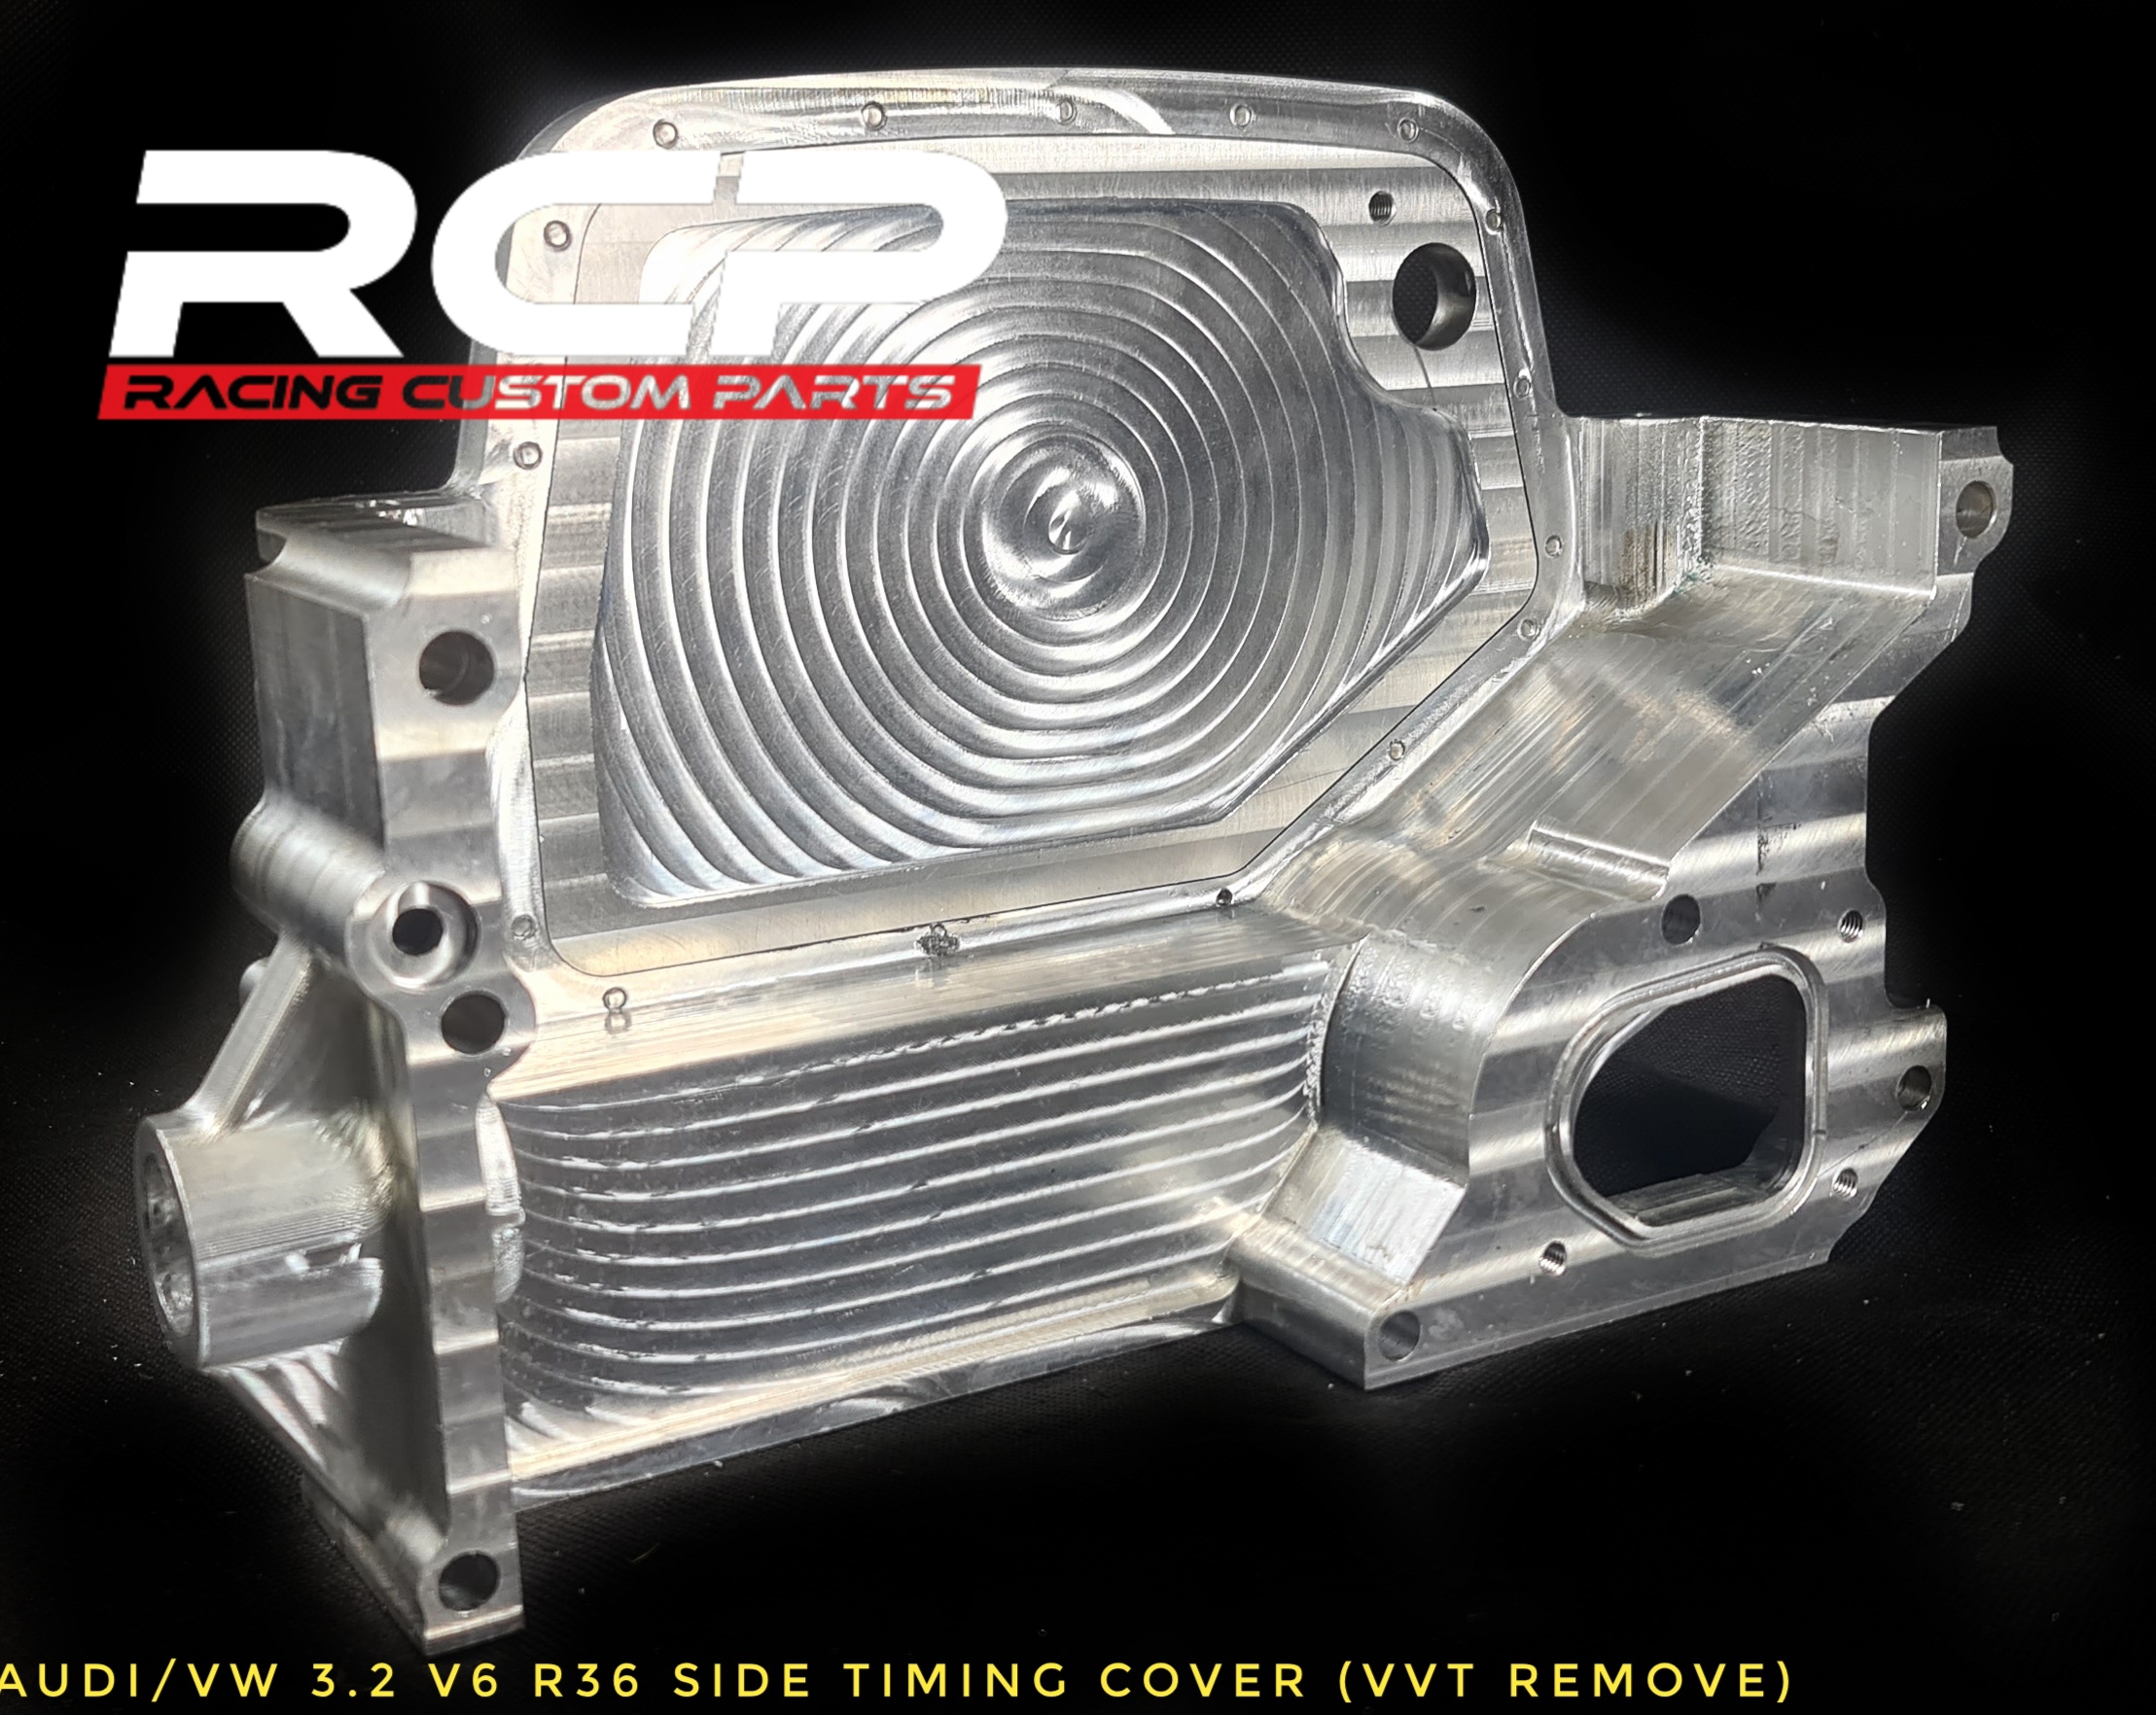 r32 vr6 r36 side cover no vvt remove rcp racing custom parts billet cnc machined audi vw turbo because race car engine cam cover